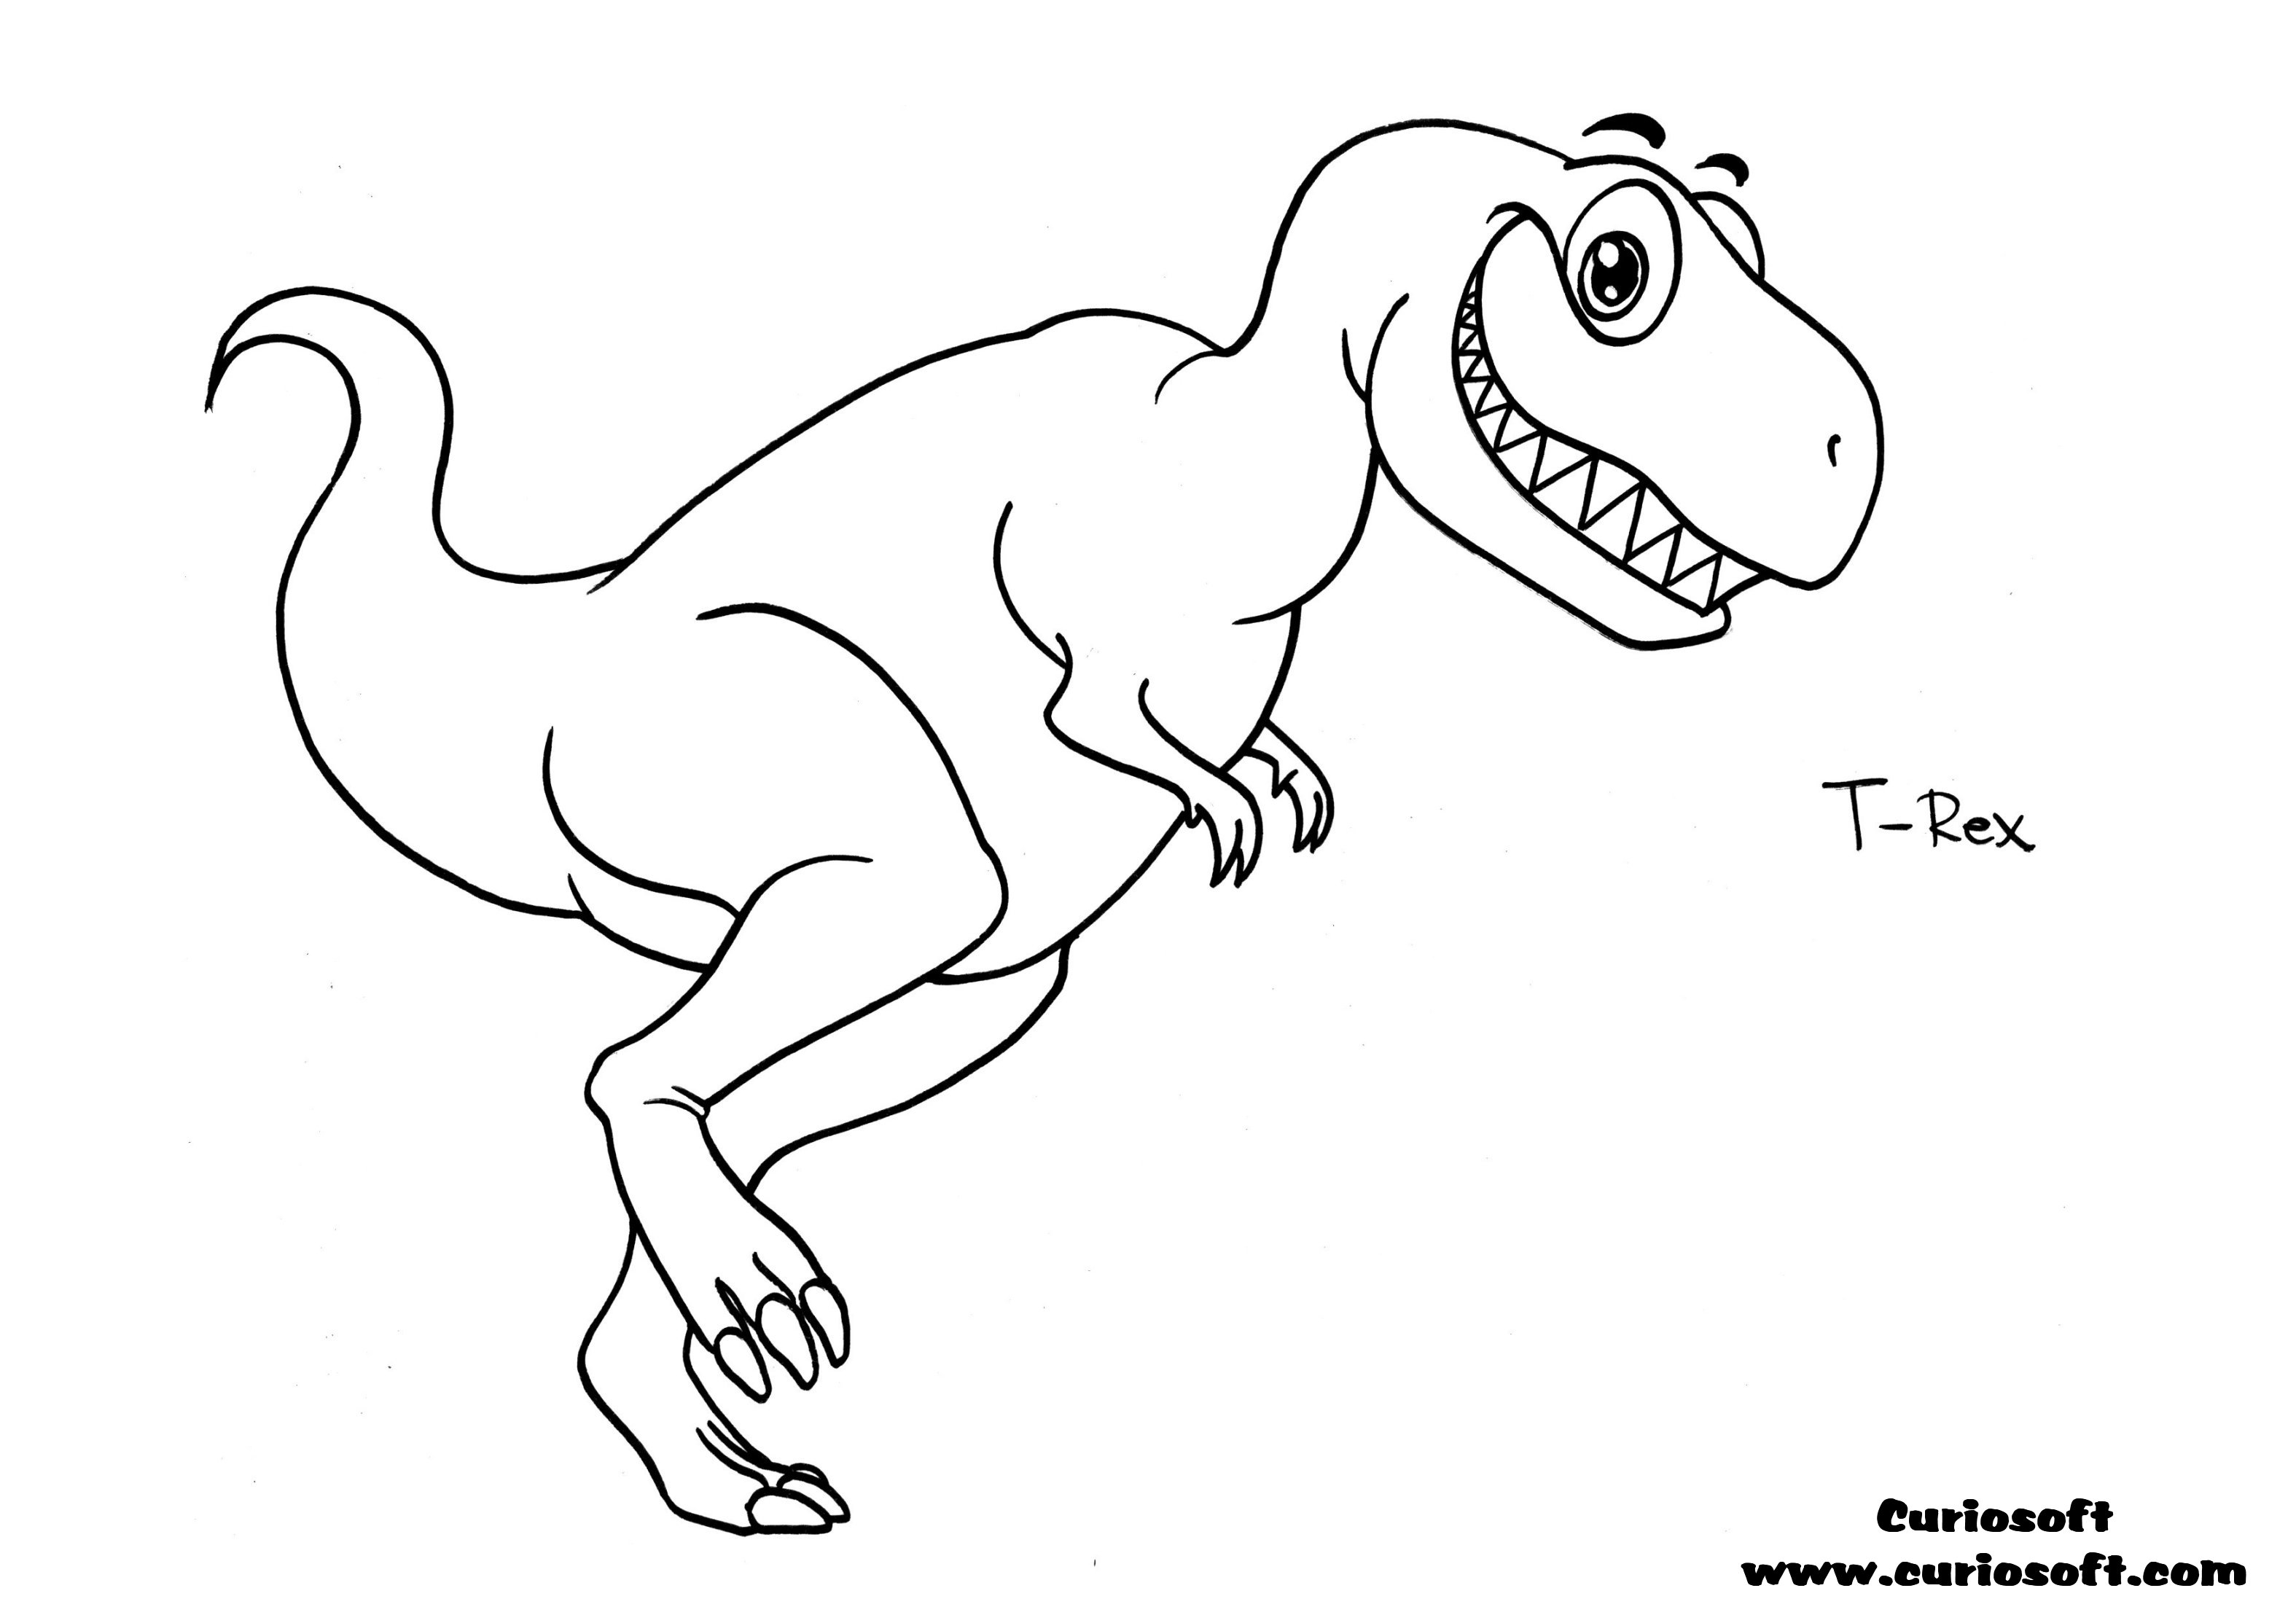 t rex coloring page free kids games coloring pages t rex page coloring 